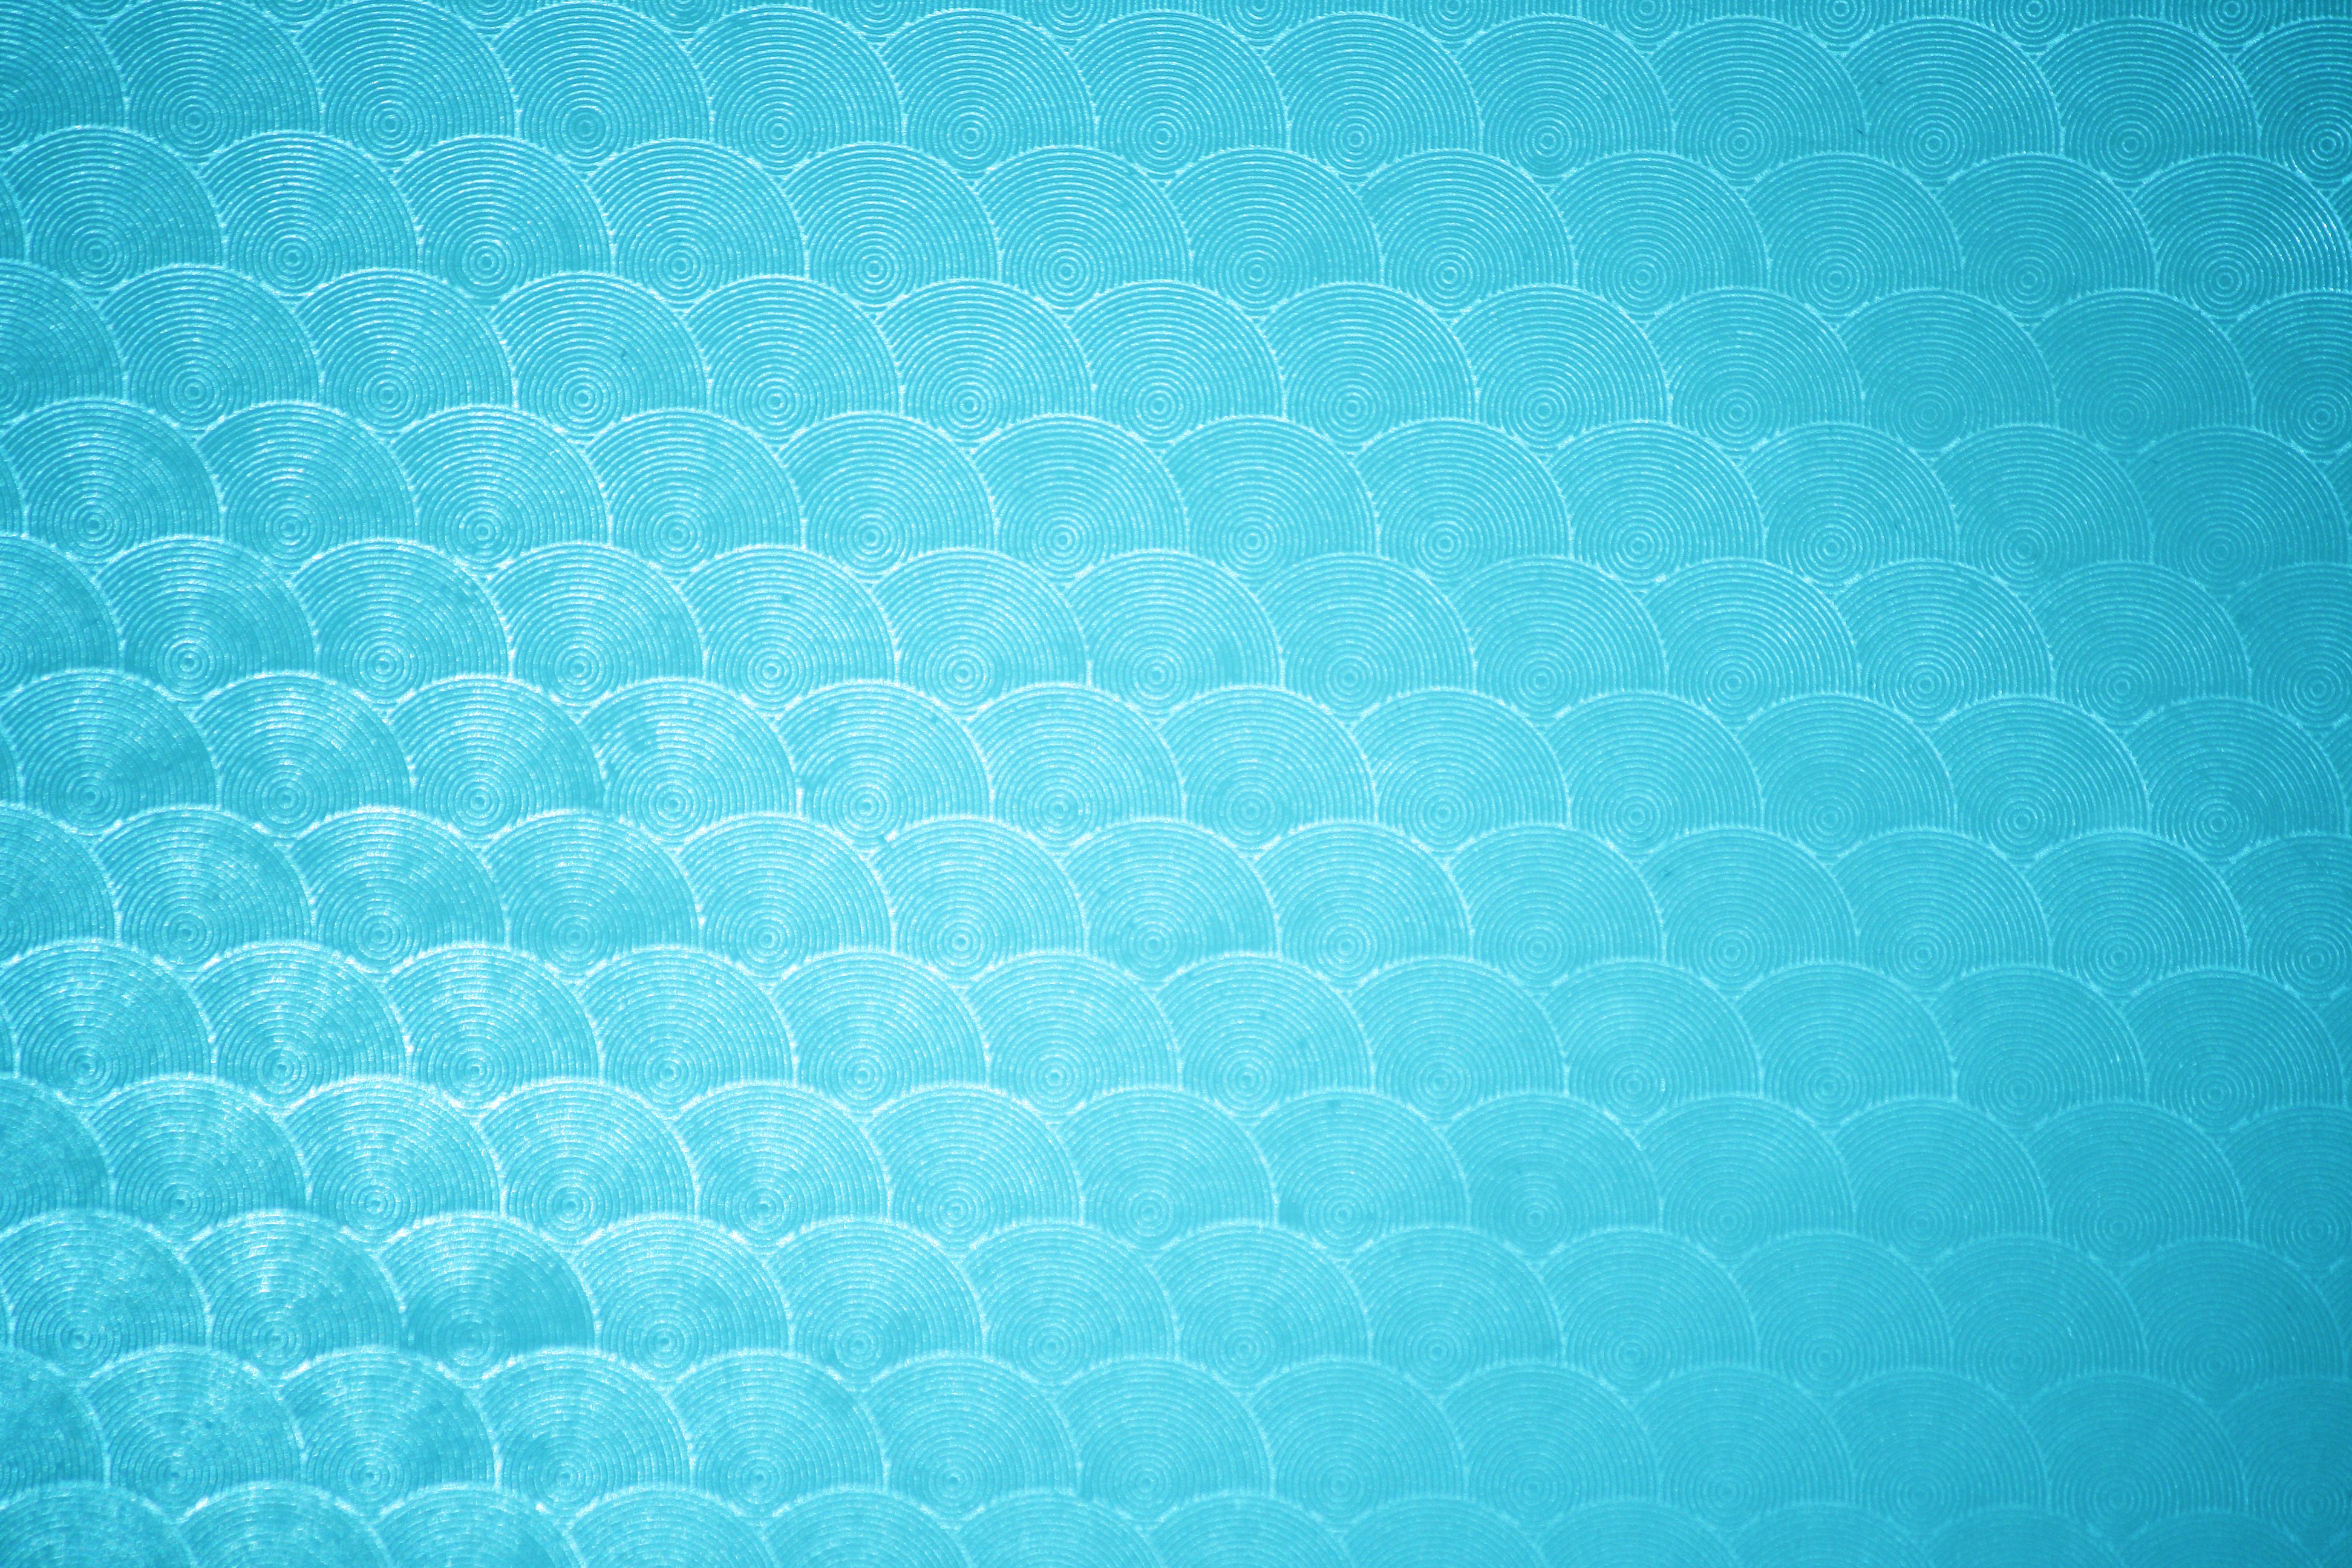 Turquoise Circle Patterned Plastic Texture Picture Photograph